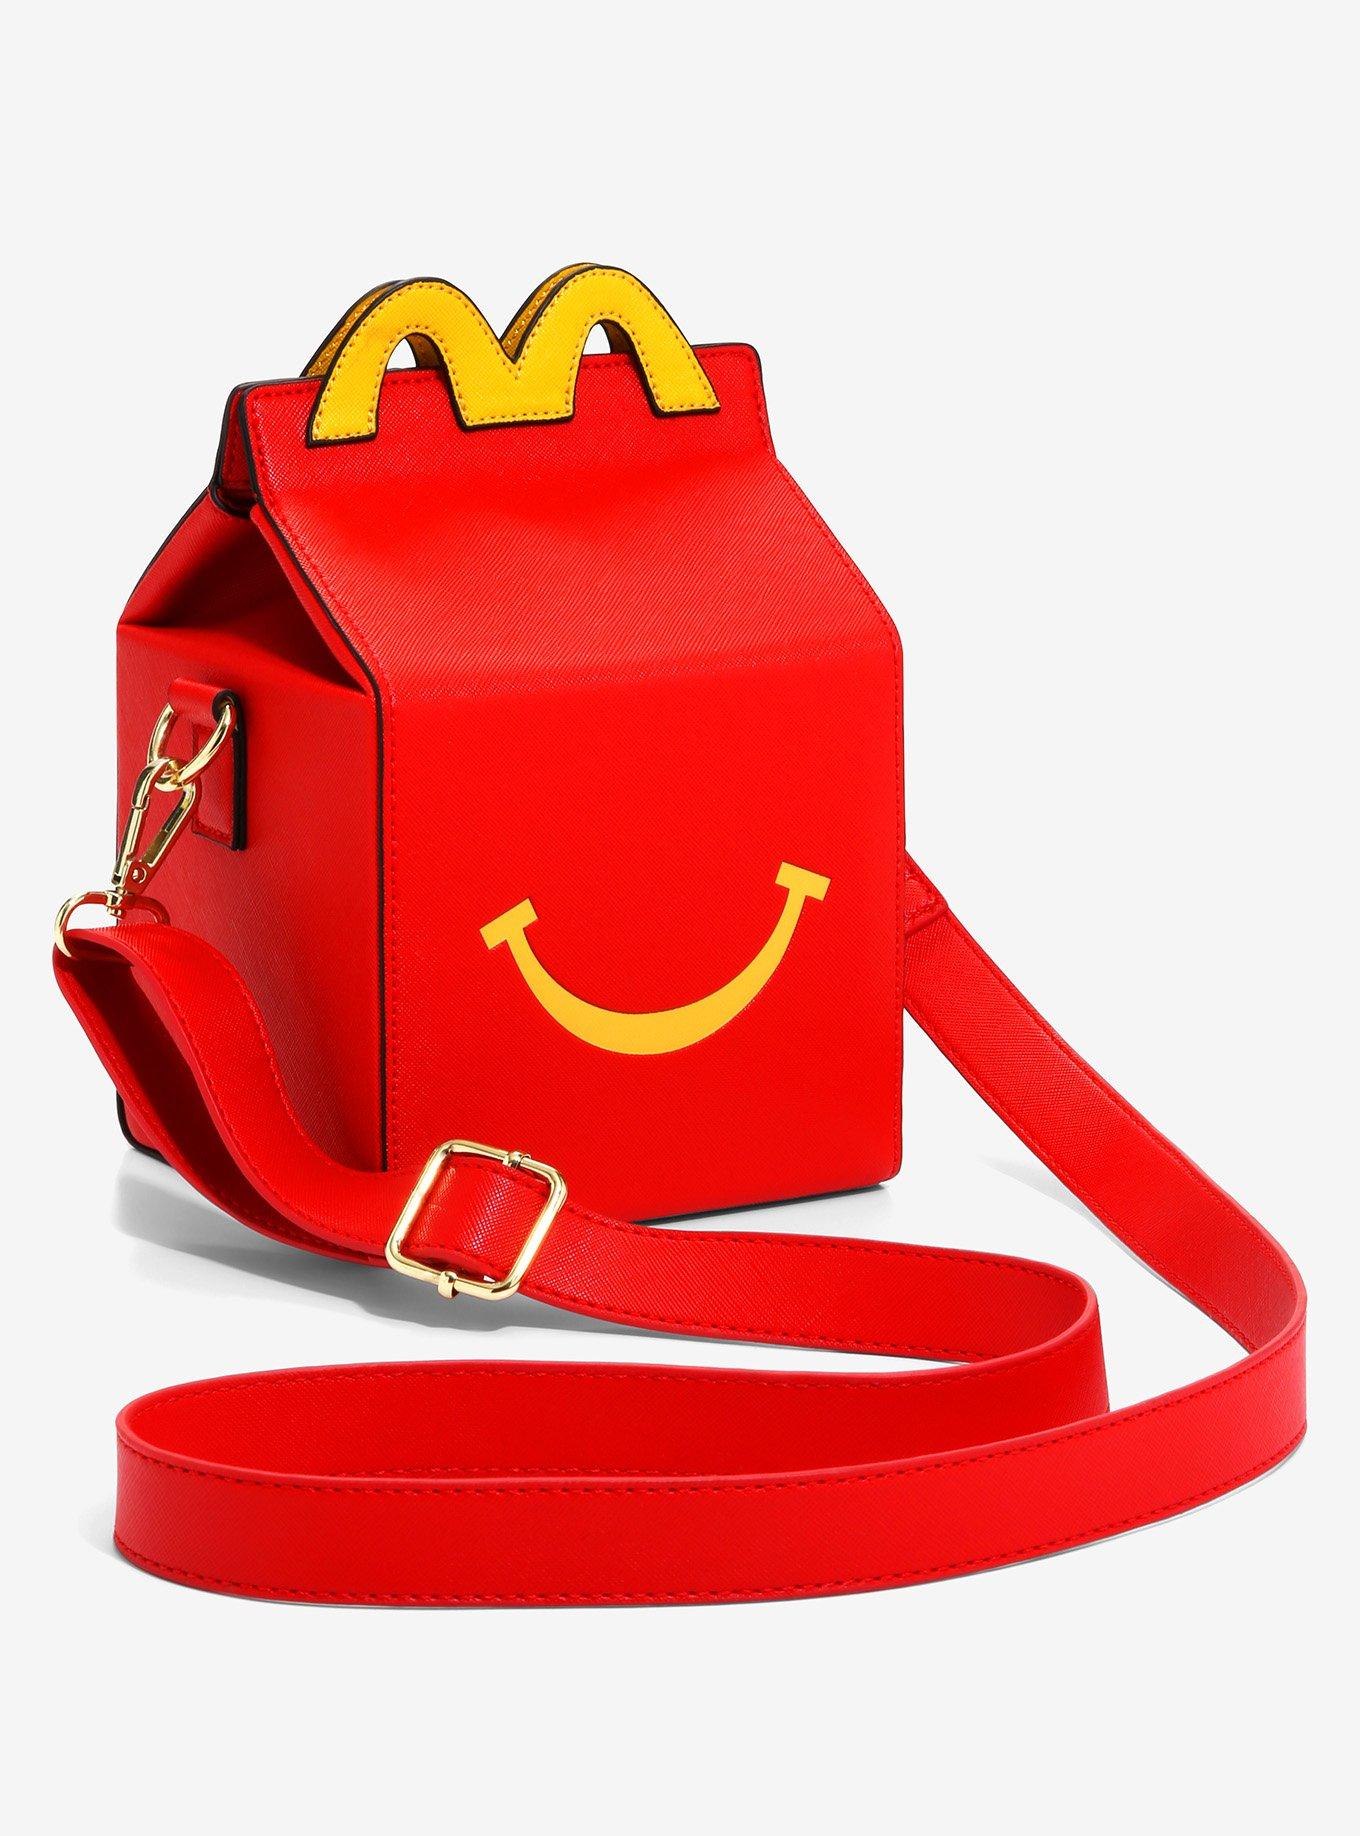 Loungefly, Bags, Loungefly Mcdonalds Crossbody French Fry Bag